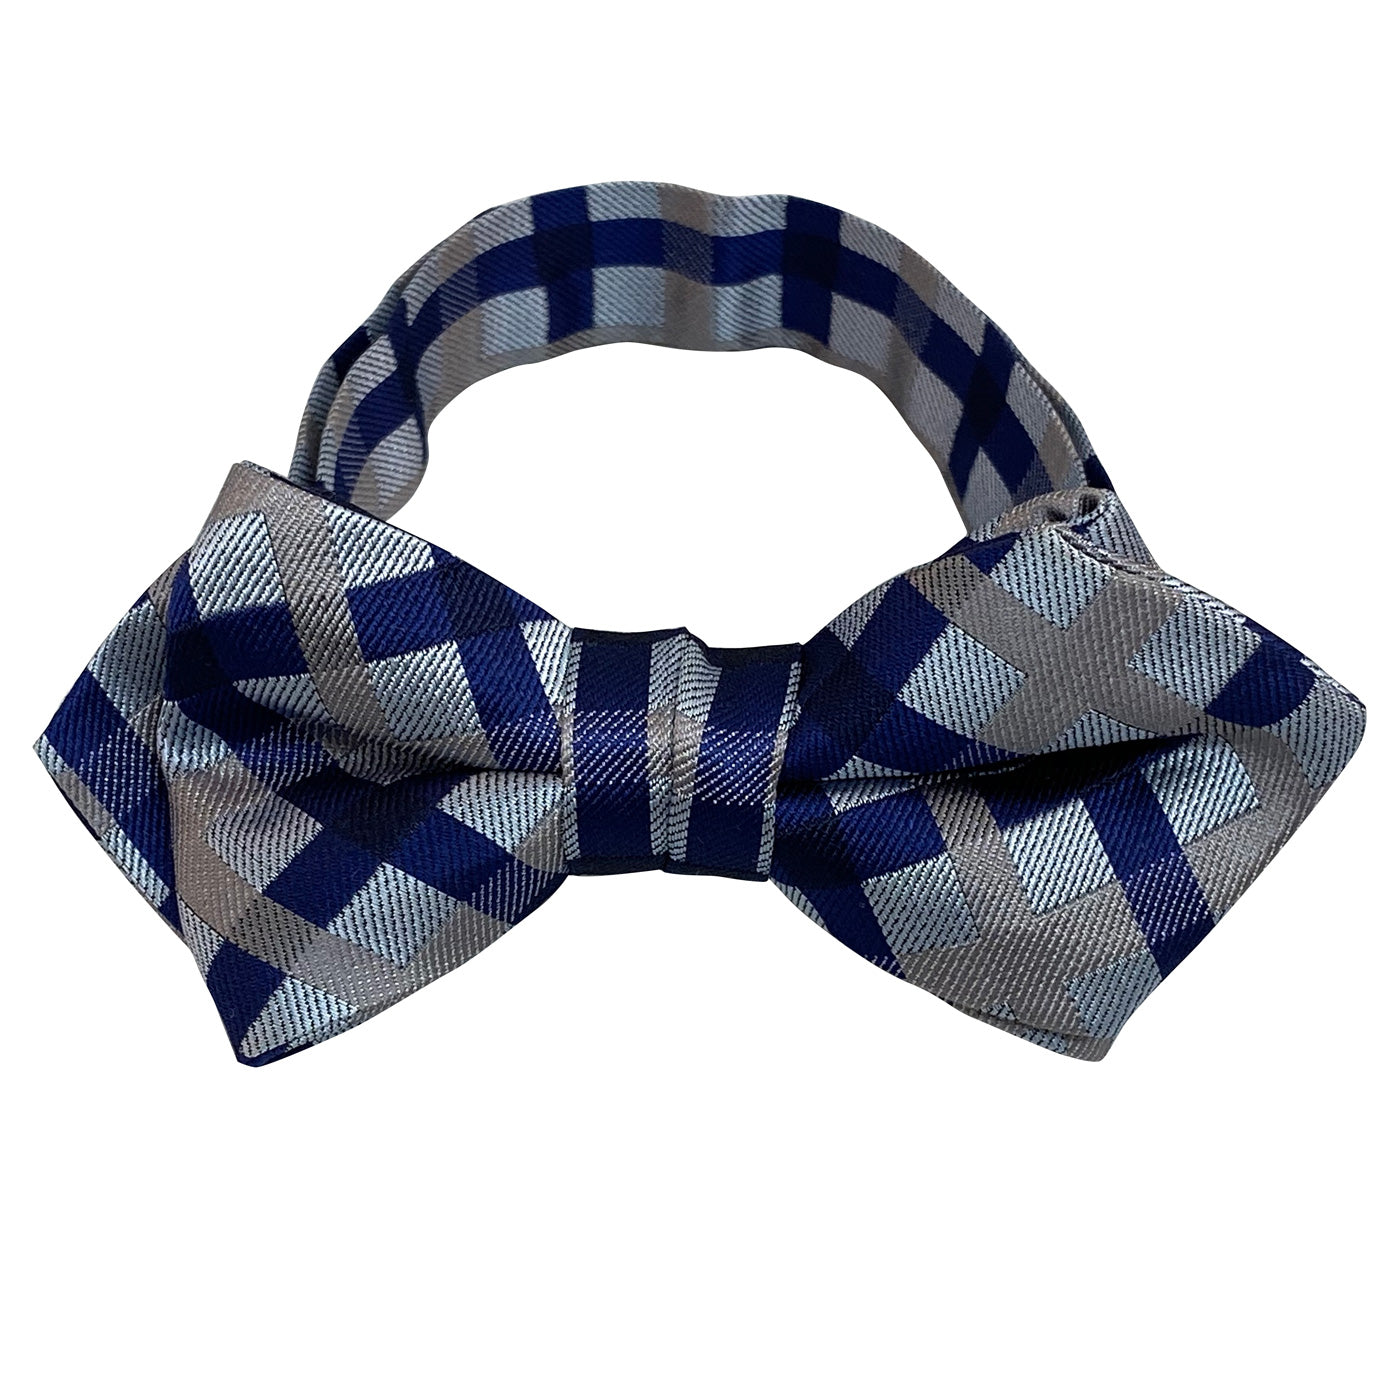 Men’s Pre-Tied Adjustable Bow Tie Silk 22. Revival Checkered Plaid Pattern Made in Japan FORTUNA Tokyo